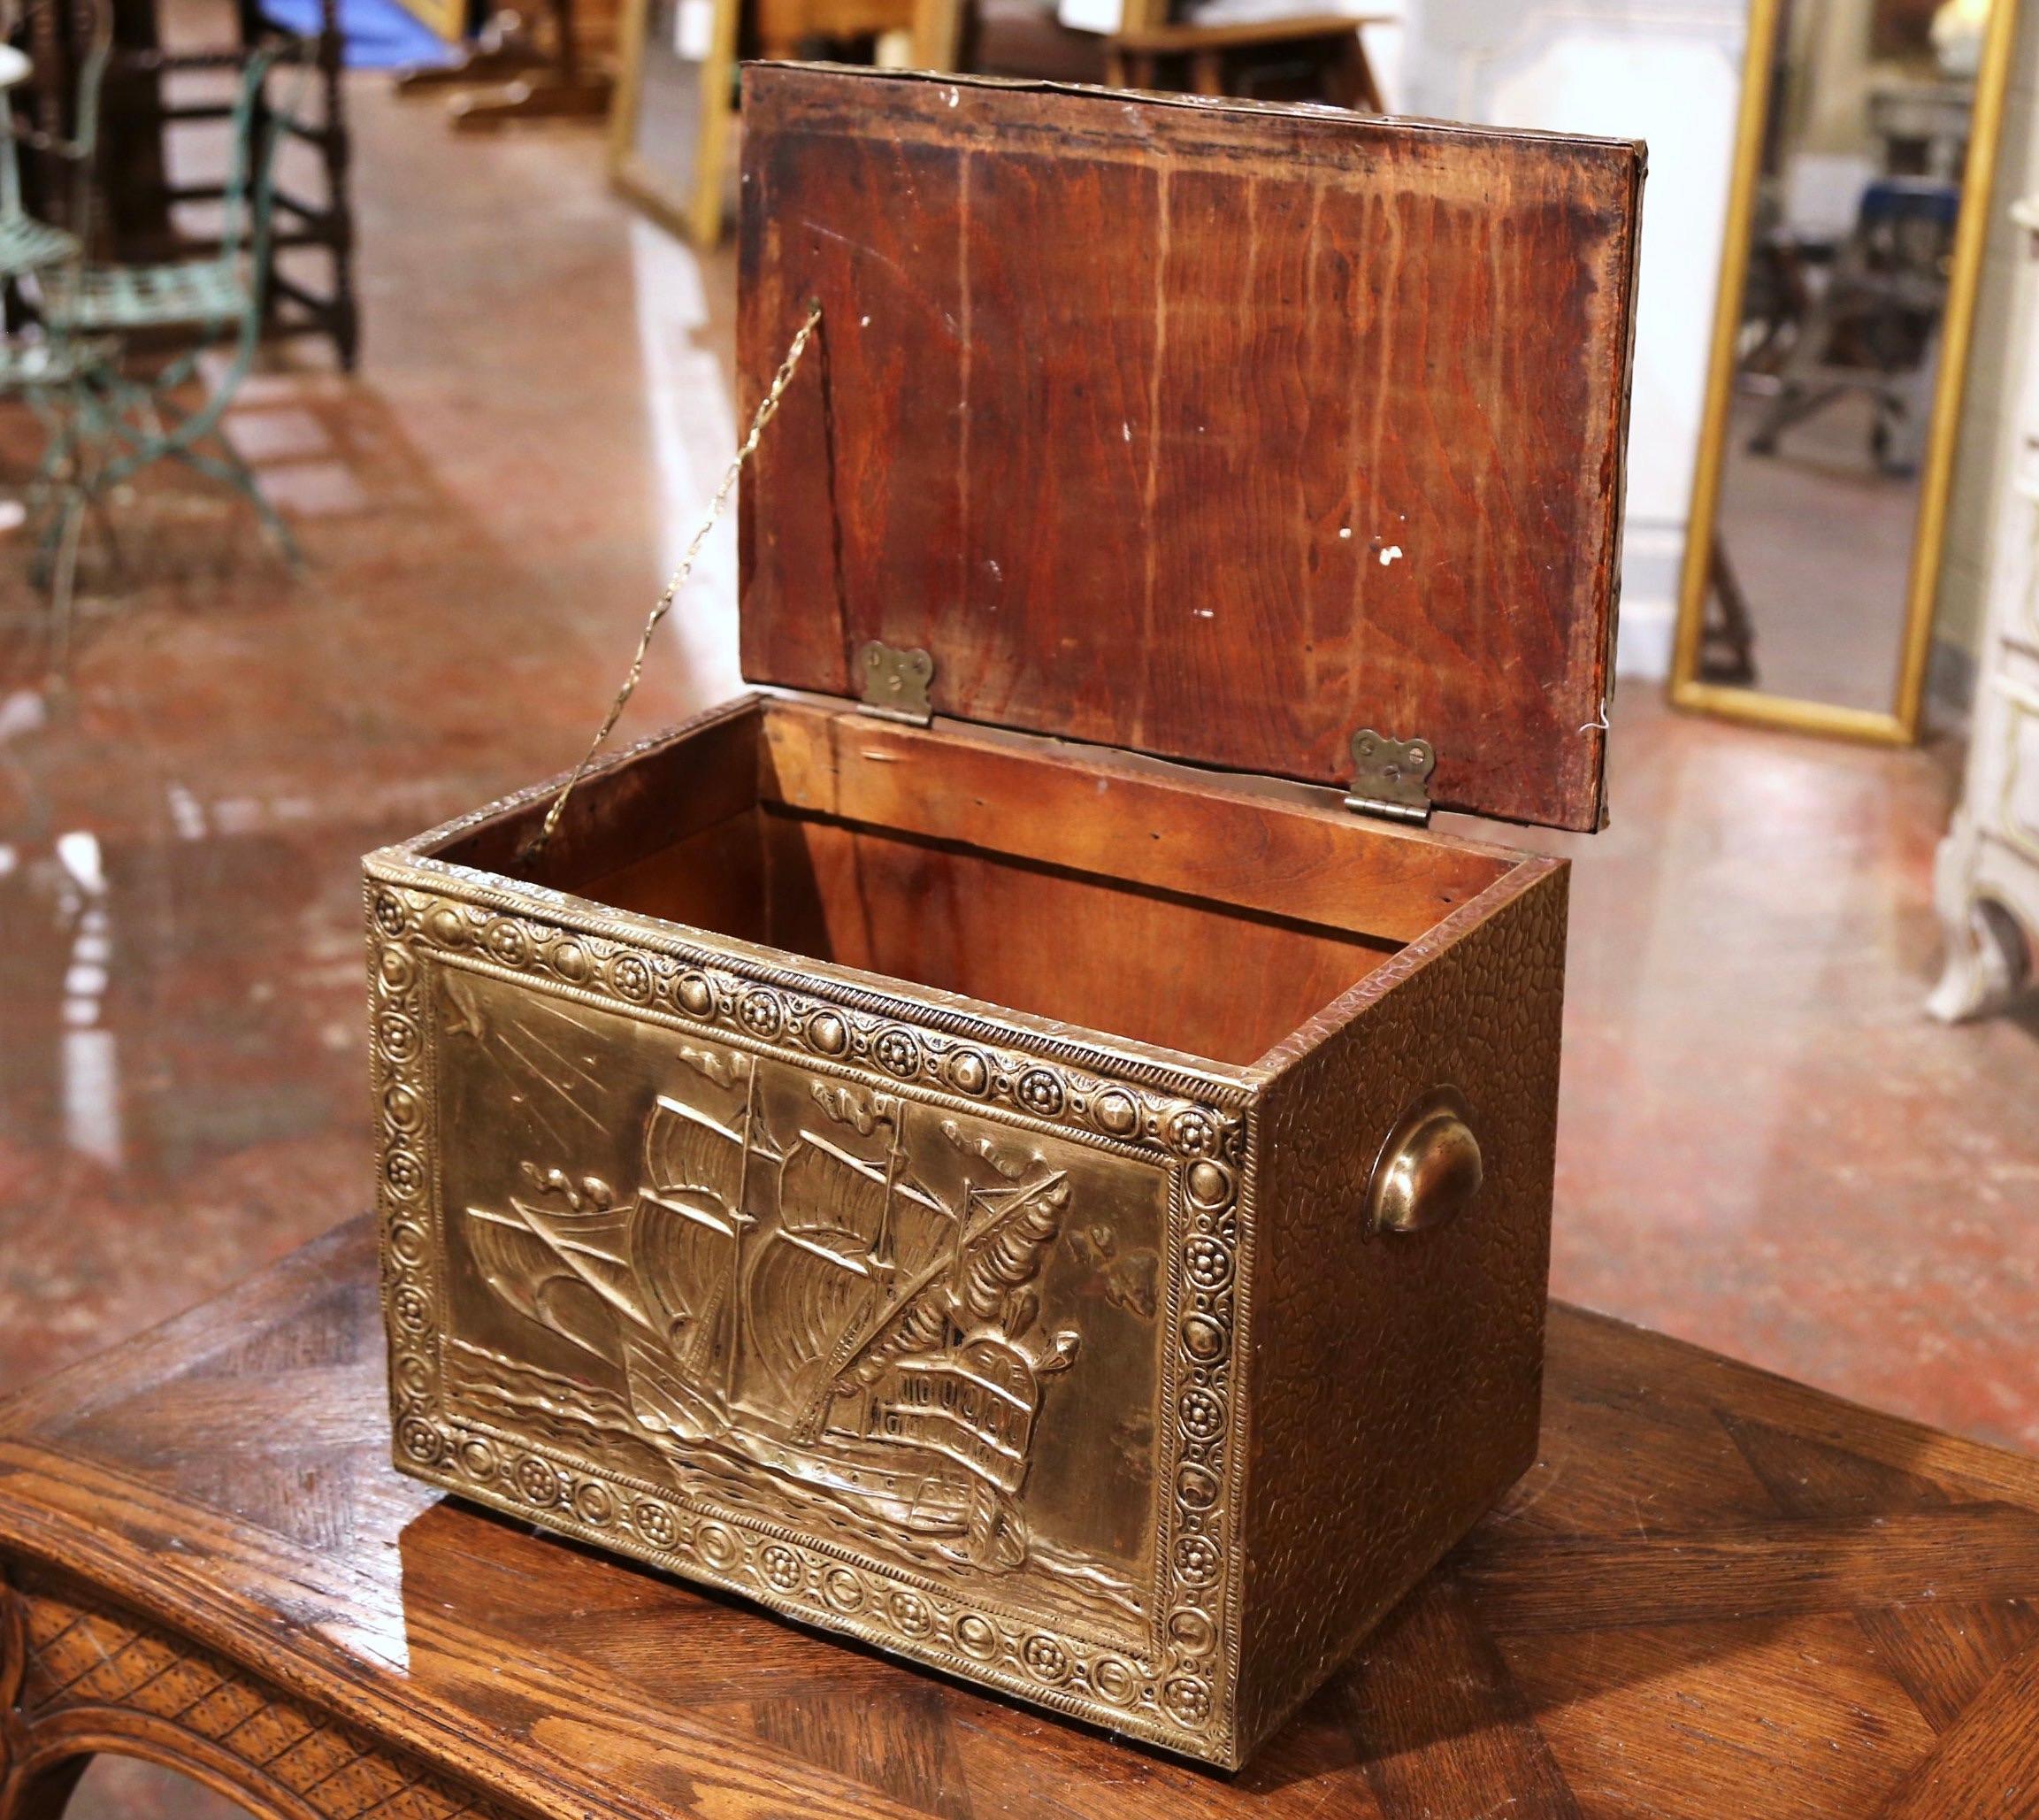 19th Century French Repousse Brass and Wood Box with Sailboat Decor 1